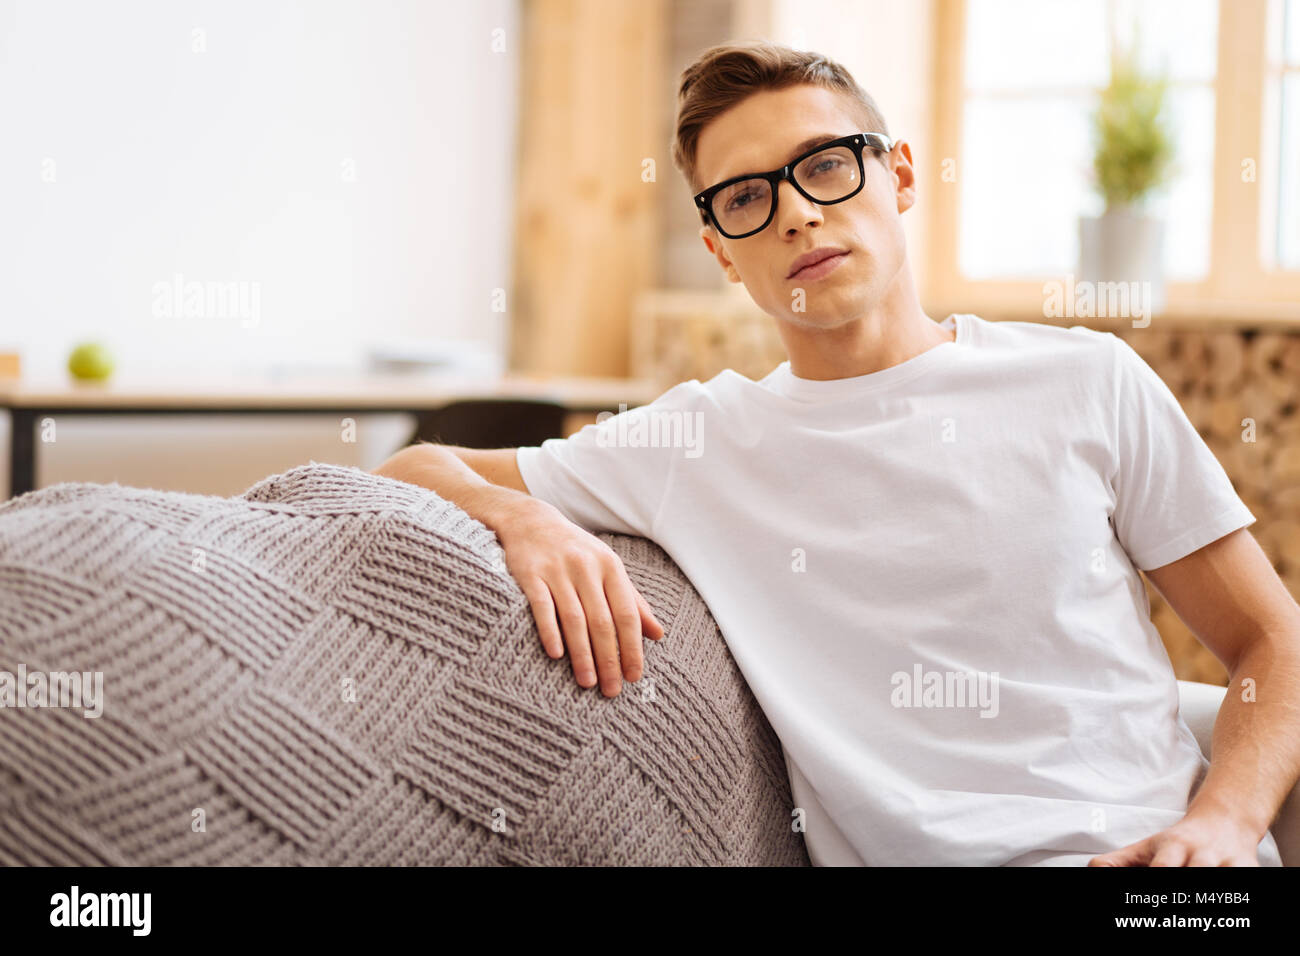 Serious young man sitting on the soda and thinking Stock Photo